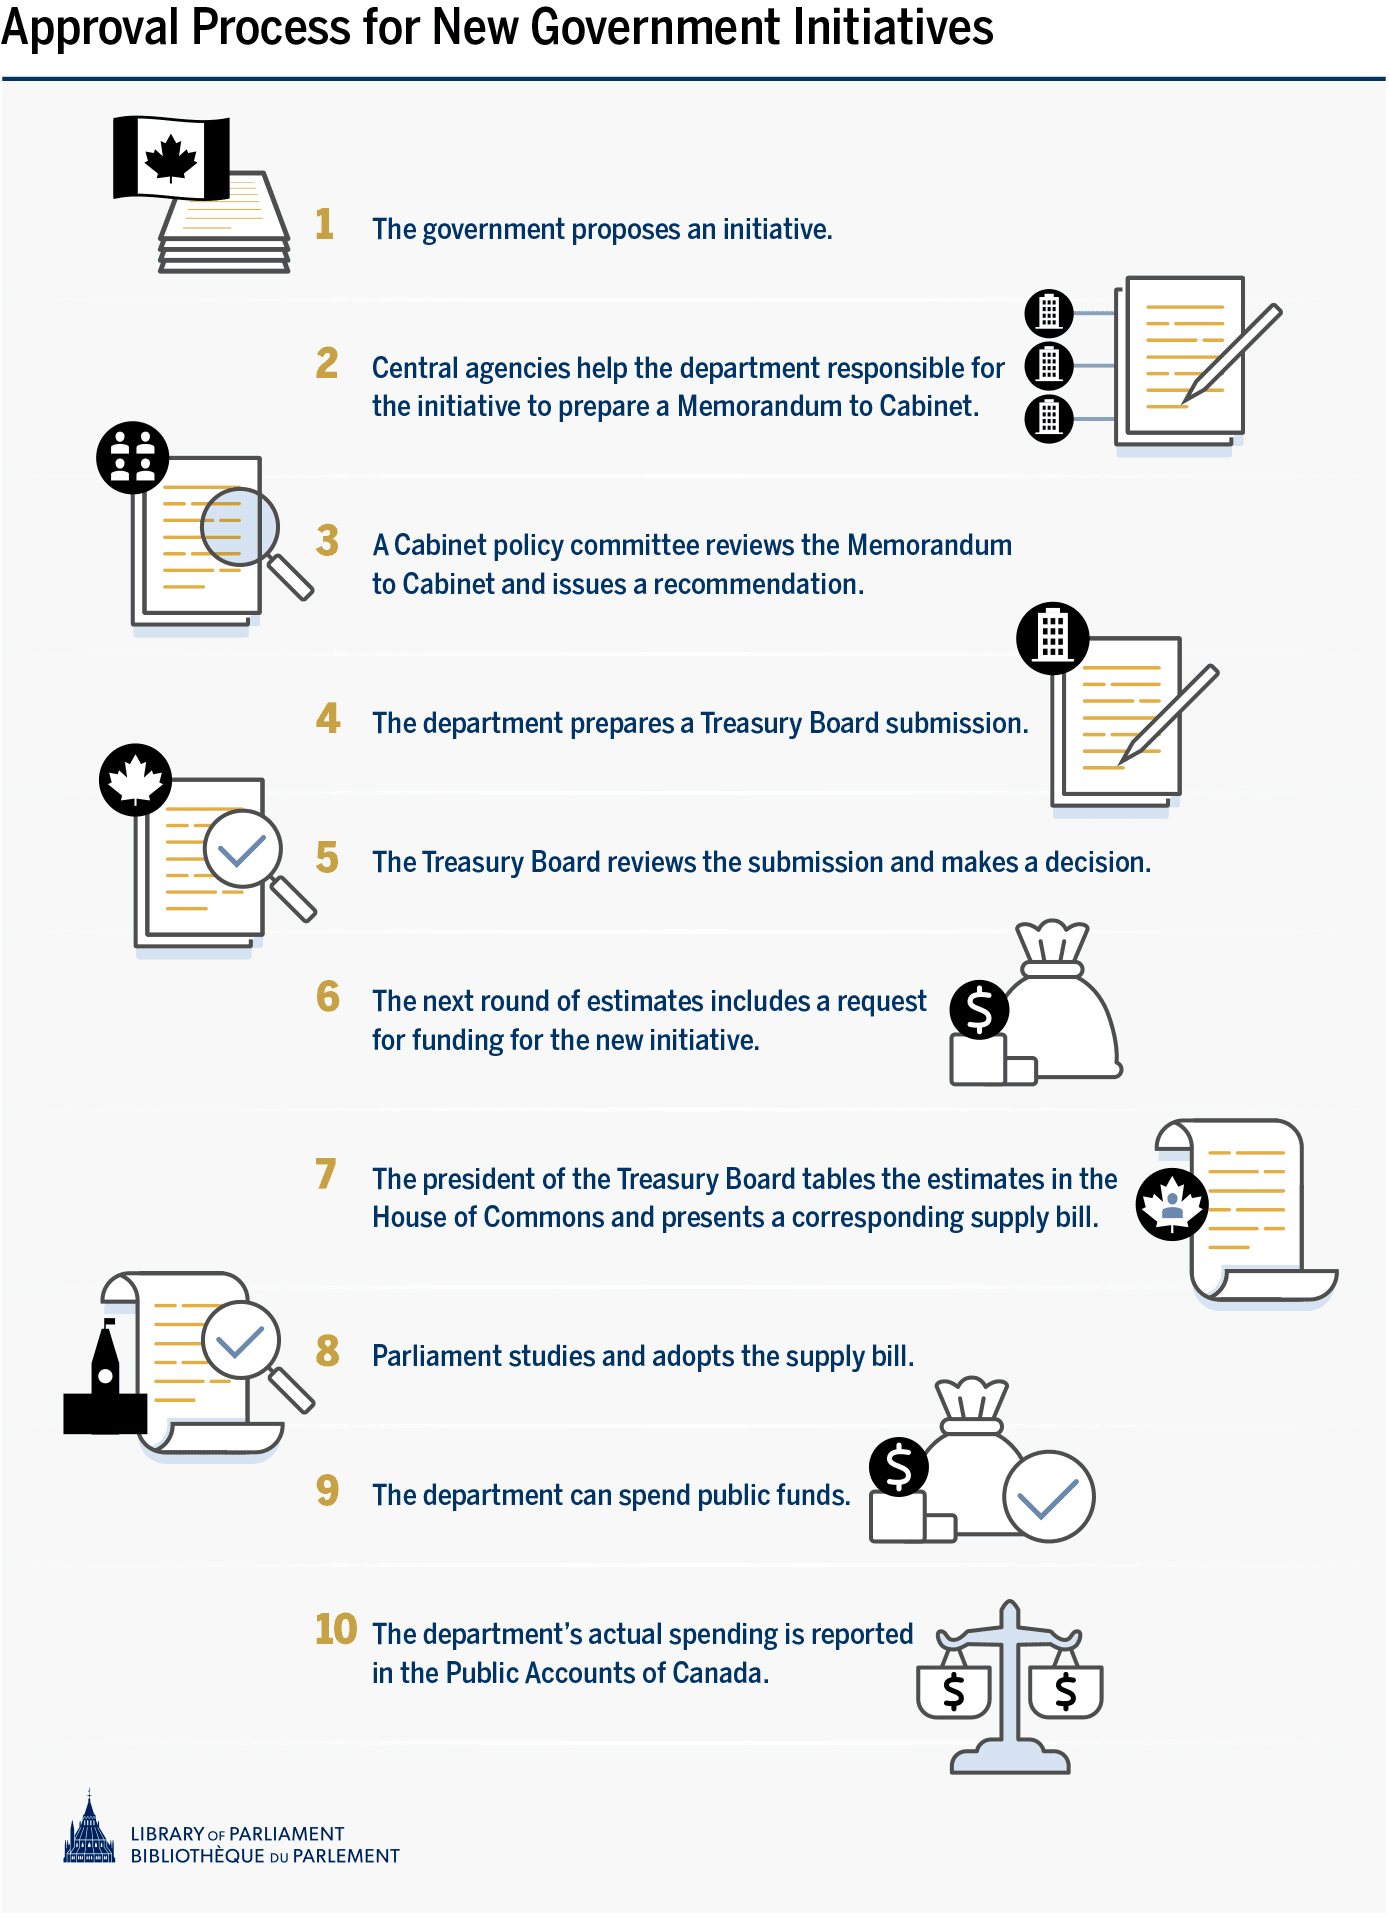 The infographic outlines the approval process for new government initiatives.  (for full text click 'Show Text Version' below)